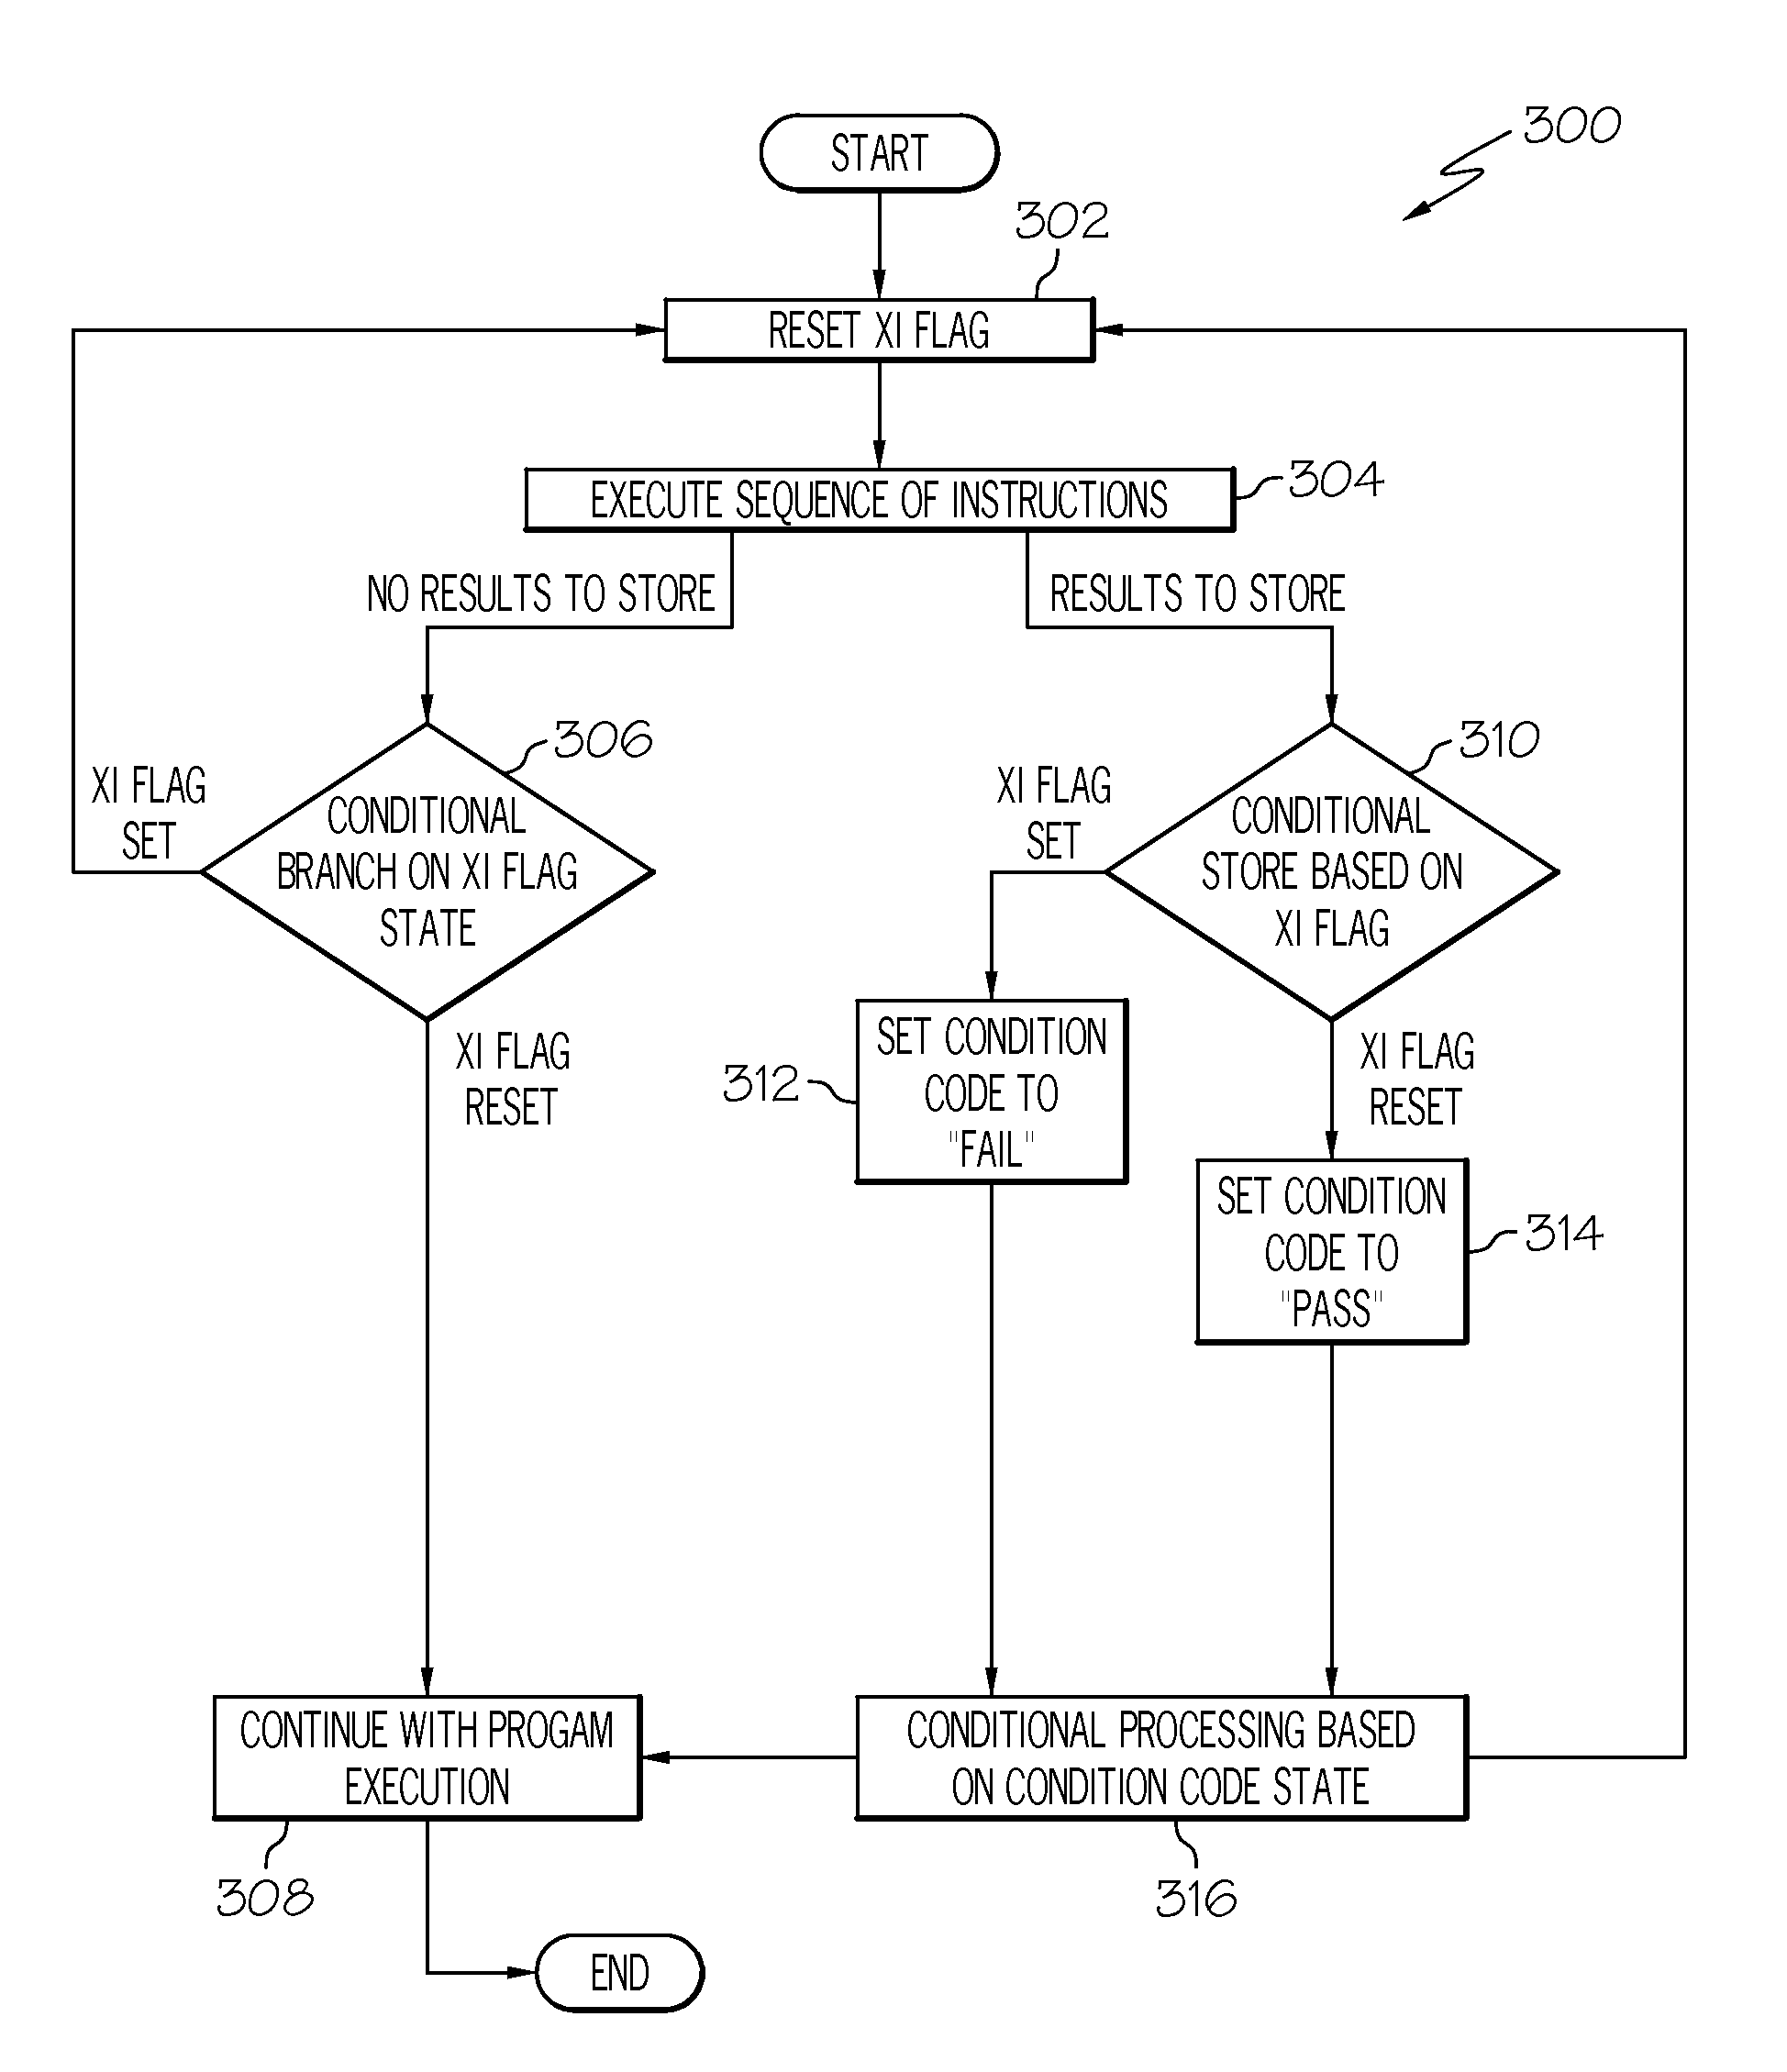 Atomic execution over accesses to multiple memory locations in a multiprocessor system